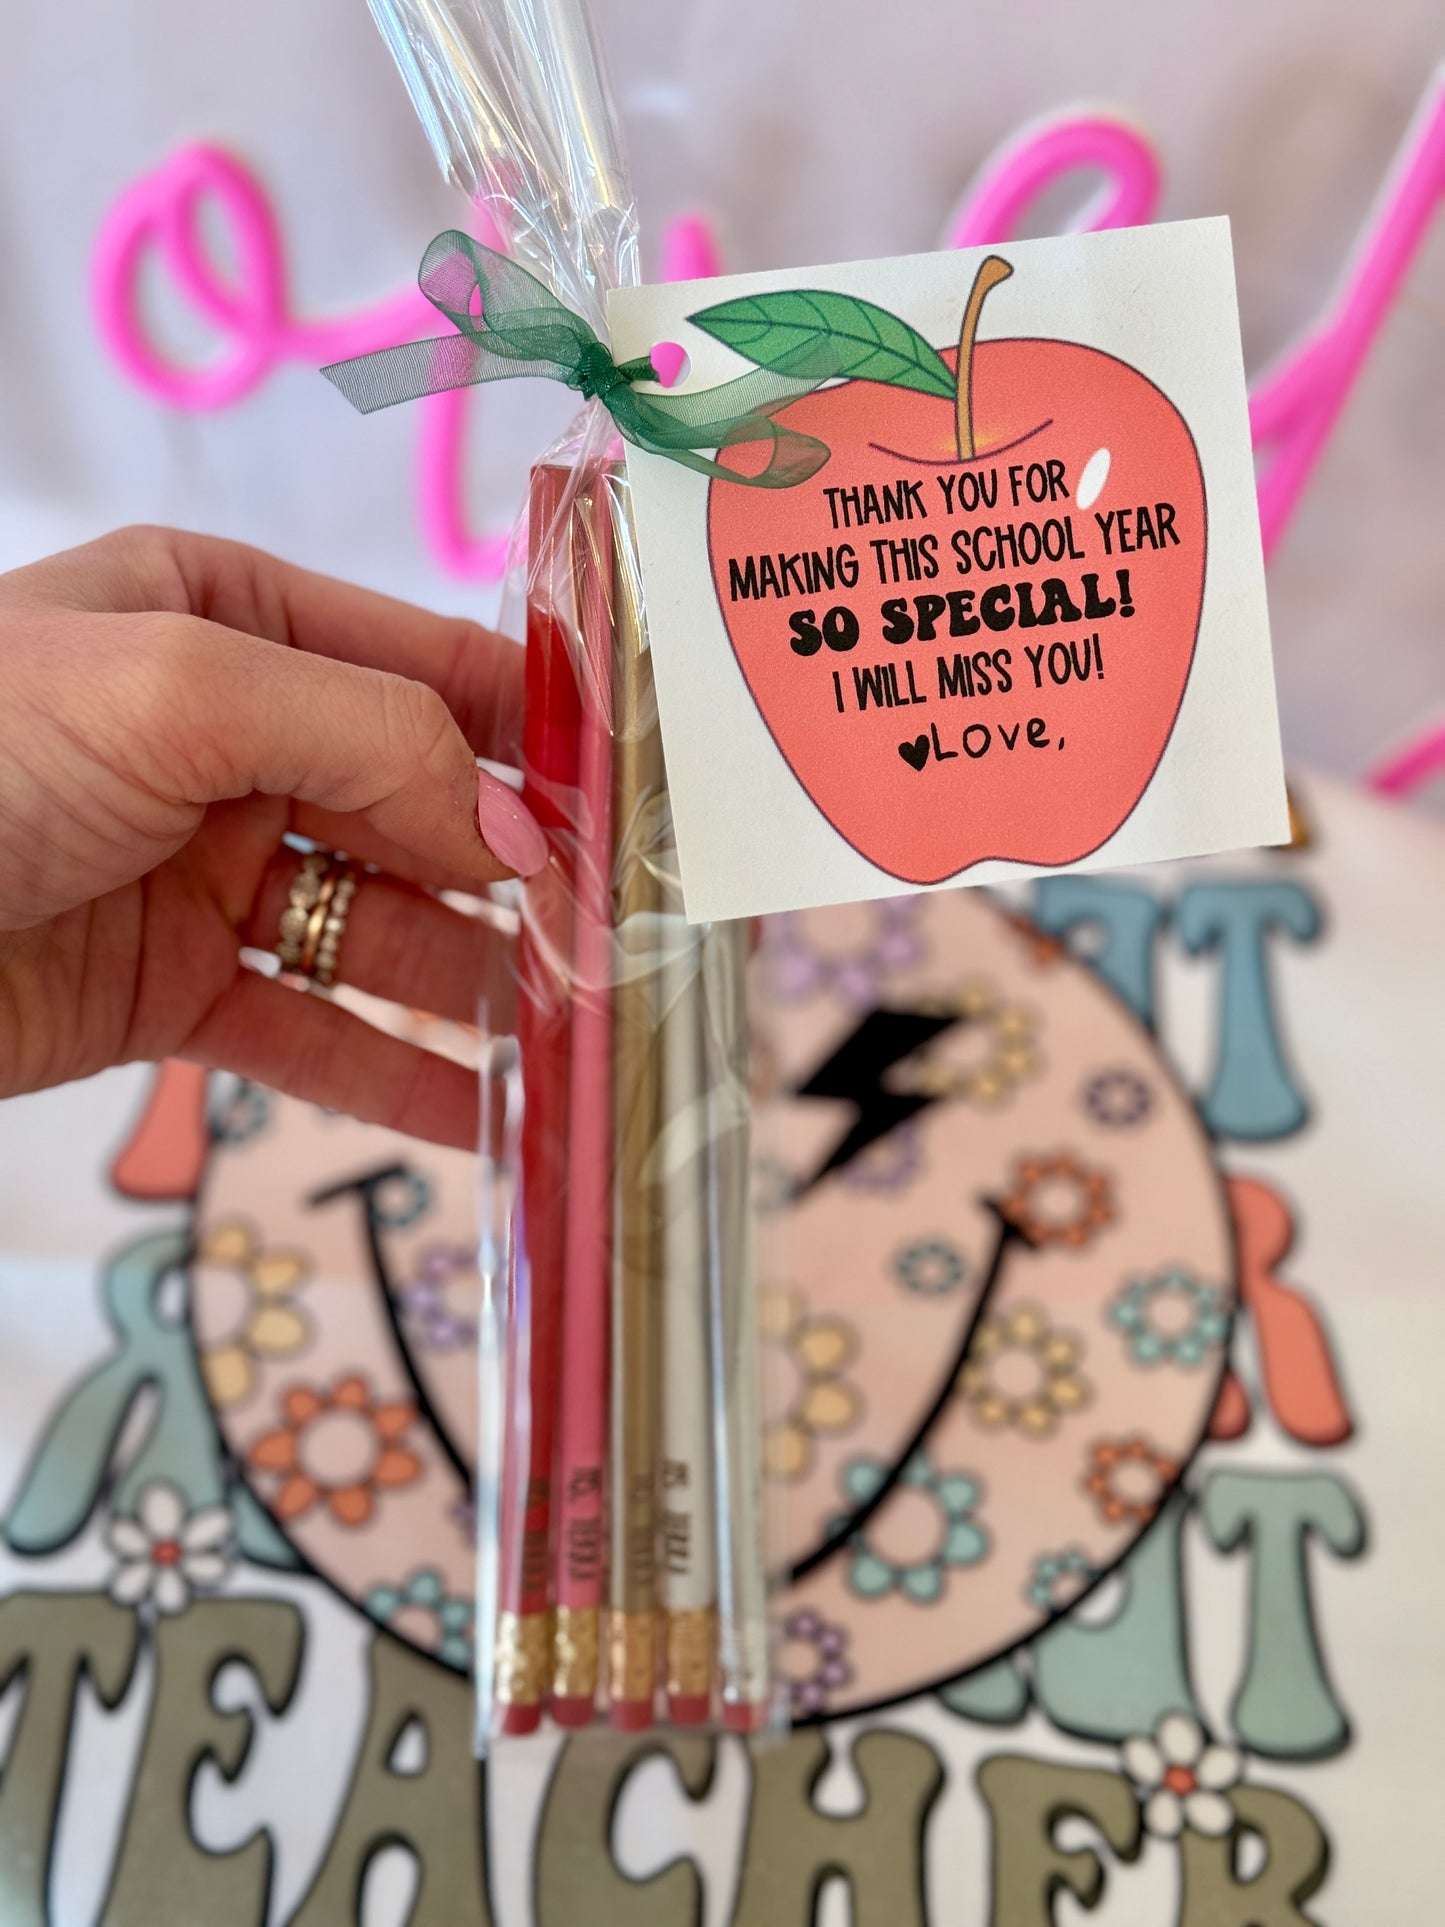 Engraved Pencils, End of Year Teacher Gift! Teacher Appreciation gift, personalized card with clear gift wrap! School staff thank you gift!